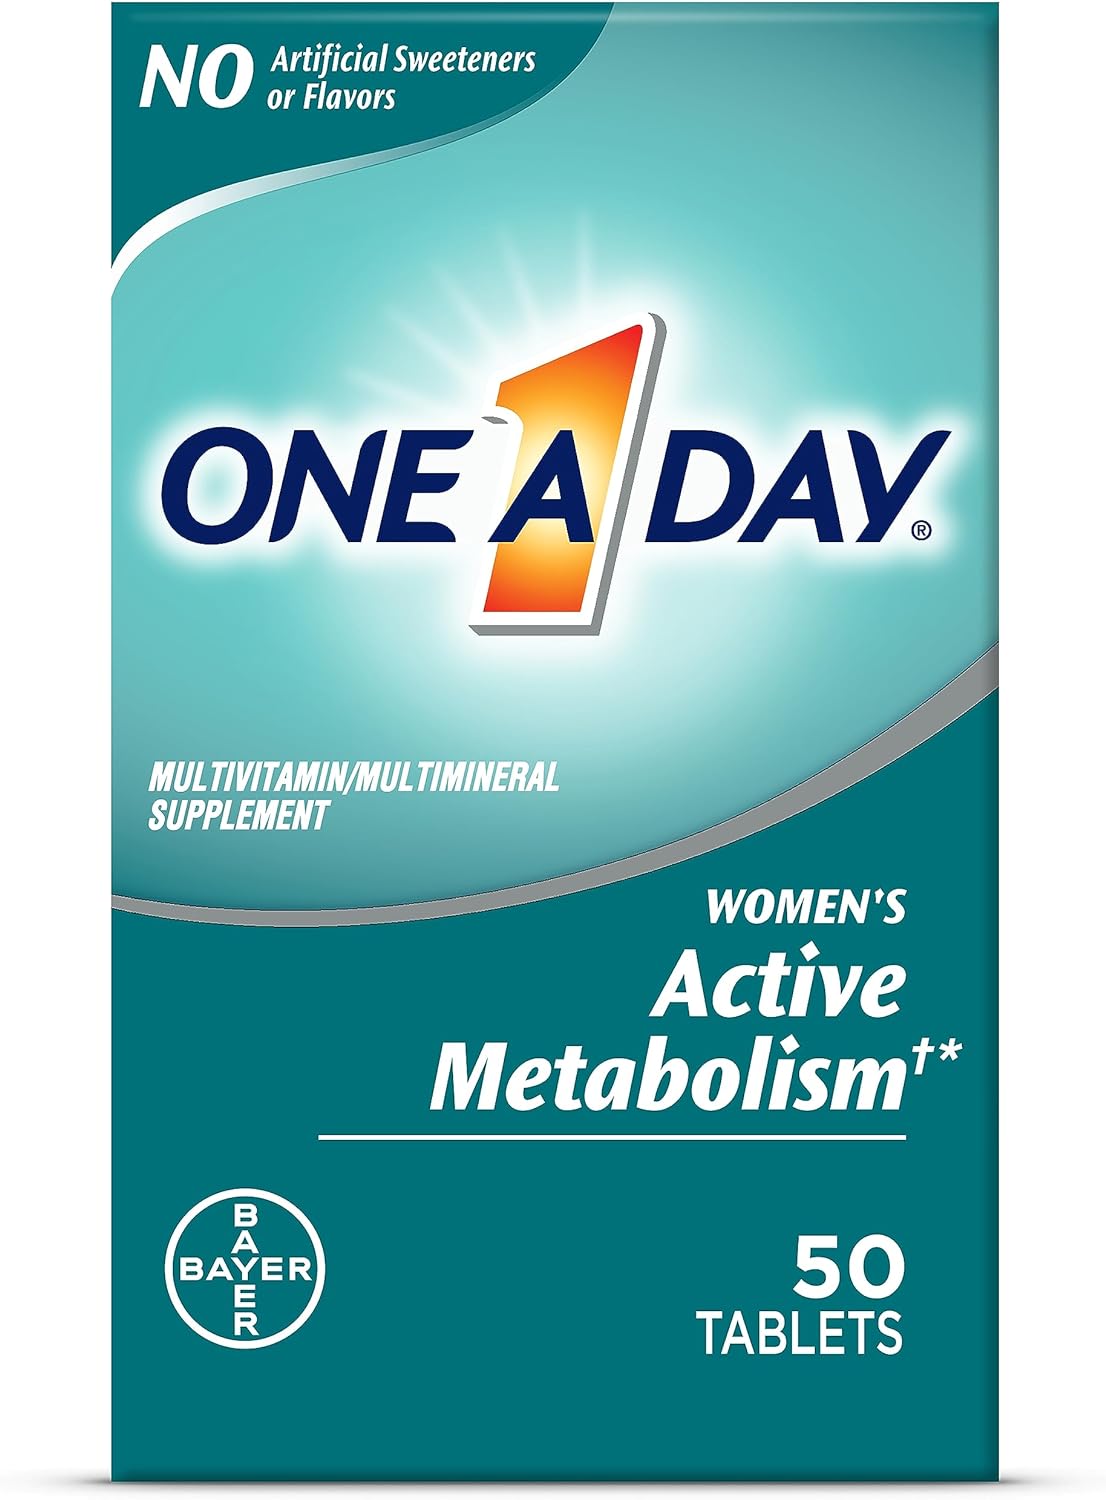 One A Day Women’s Active Metabolism Multivitamin, Supplement with Vitamin A, C, D, E and Zinc for Immune Health Support*, Iron, Calcium, Folic Acid  more, 50 Count